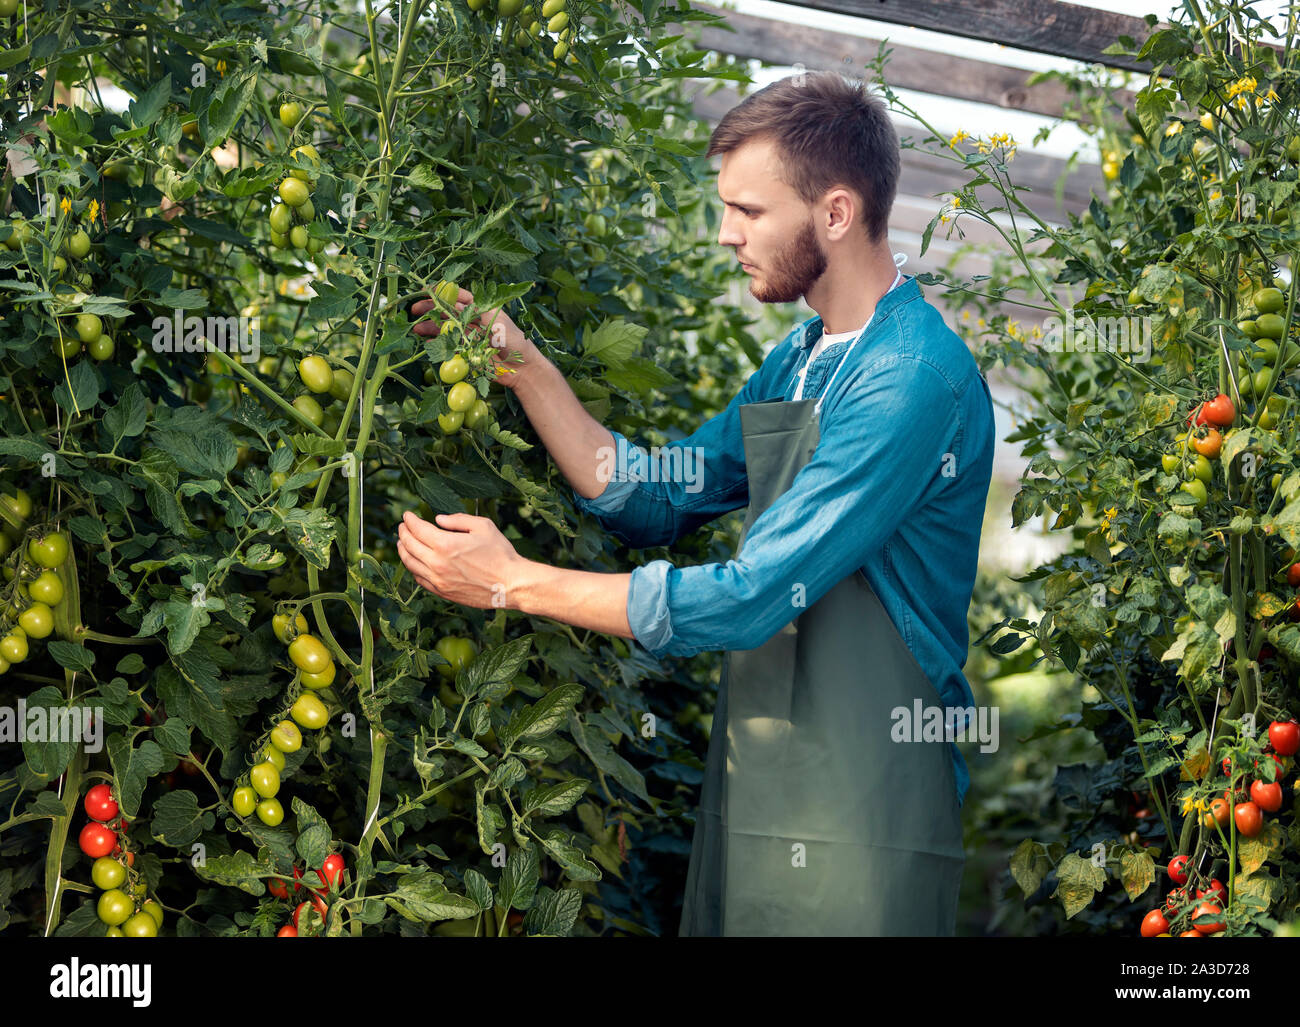 Young male agricultural employee looking after tomatoes in a hothouse Stock Photo